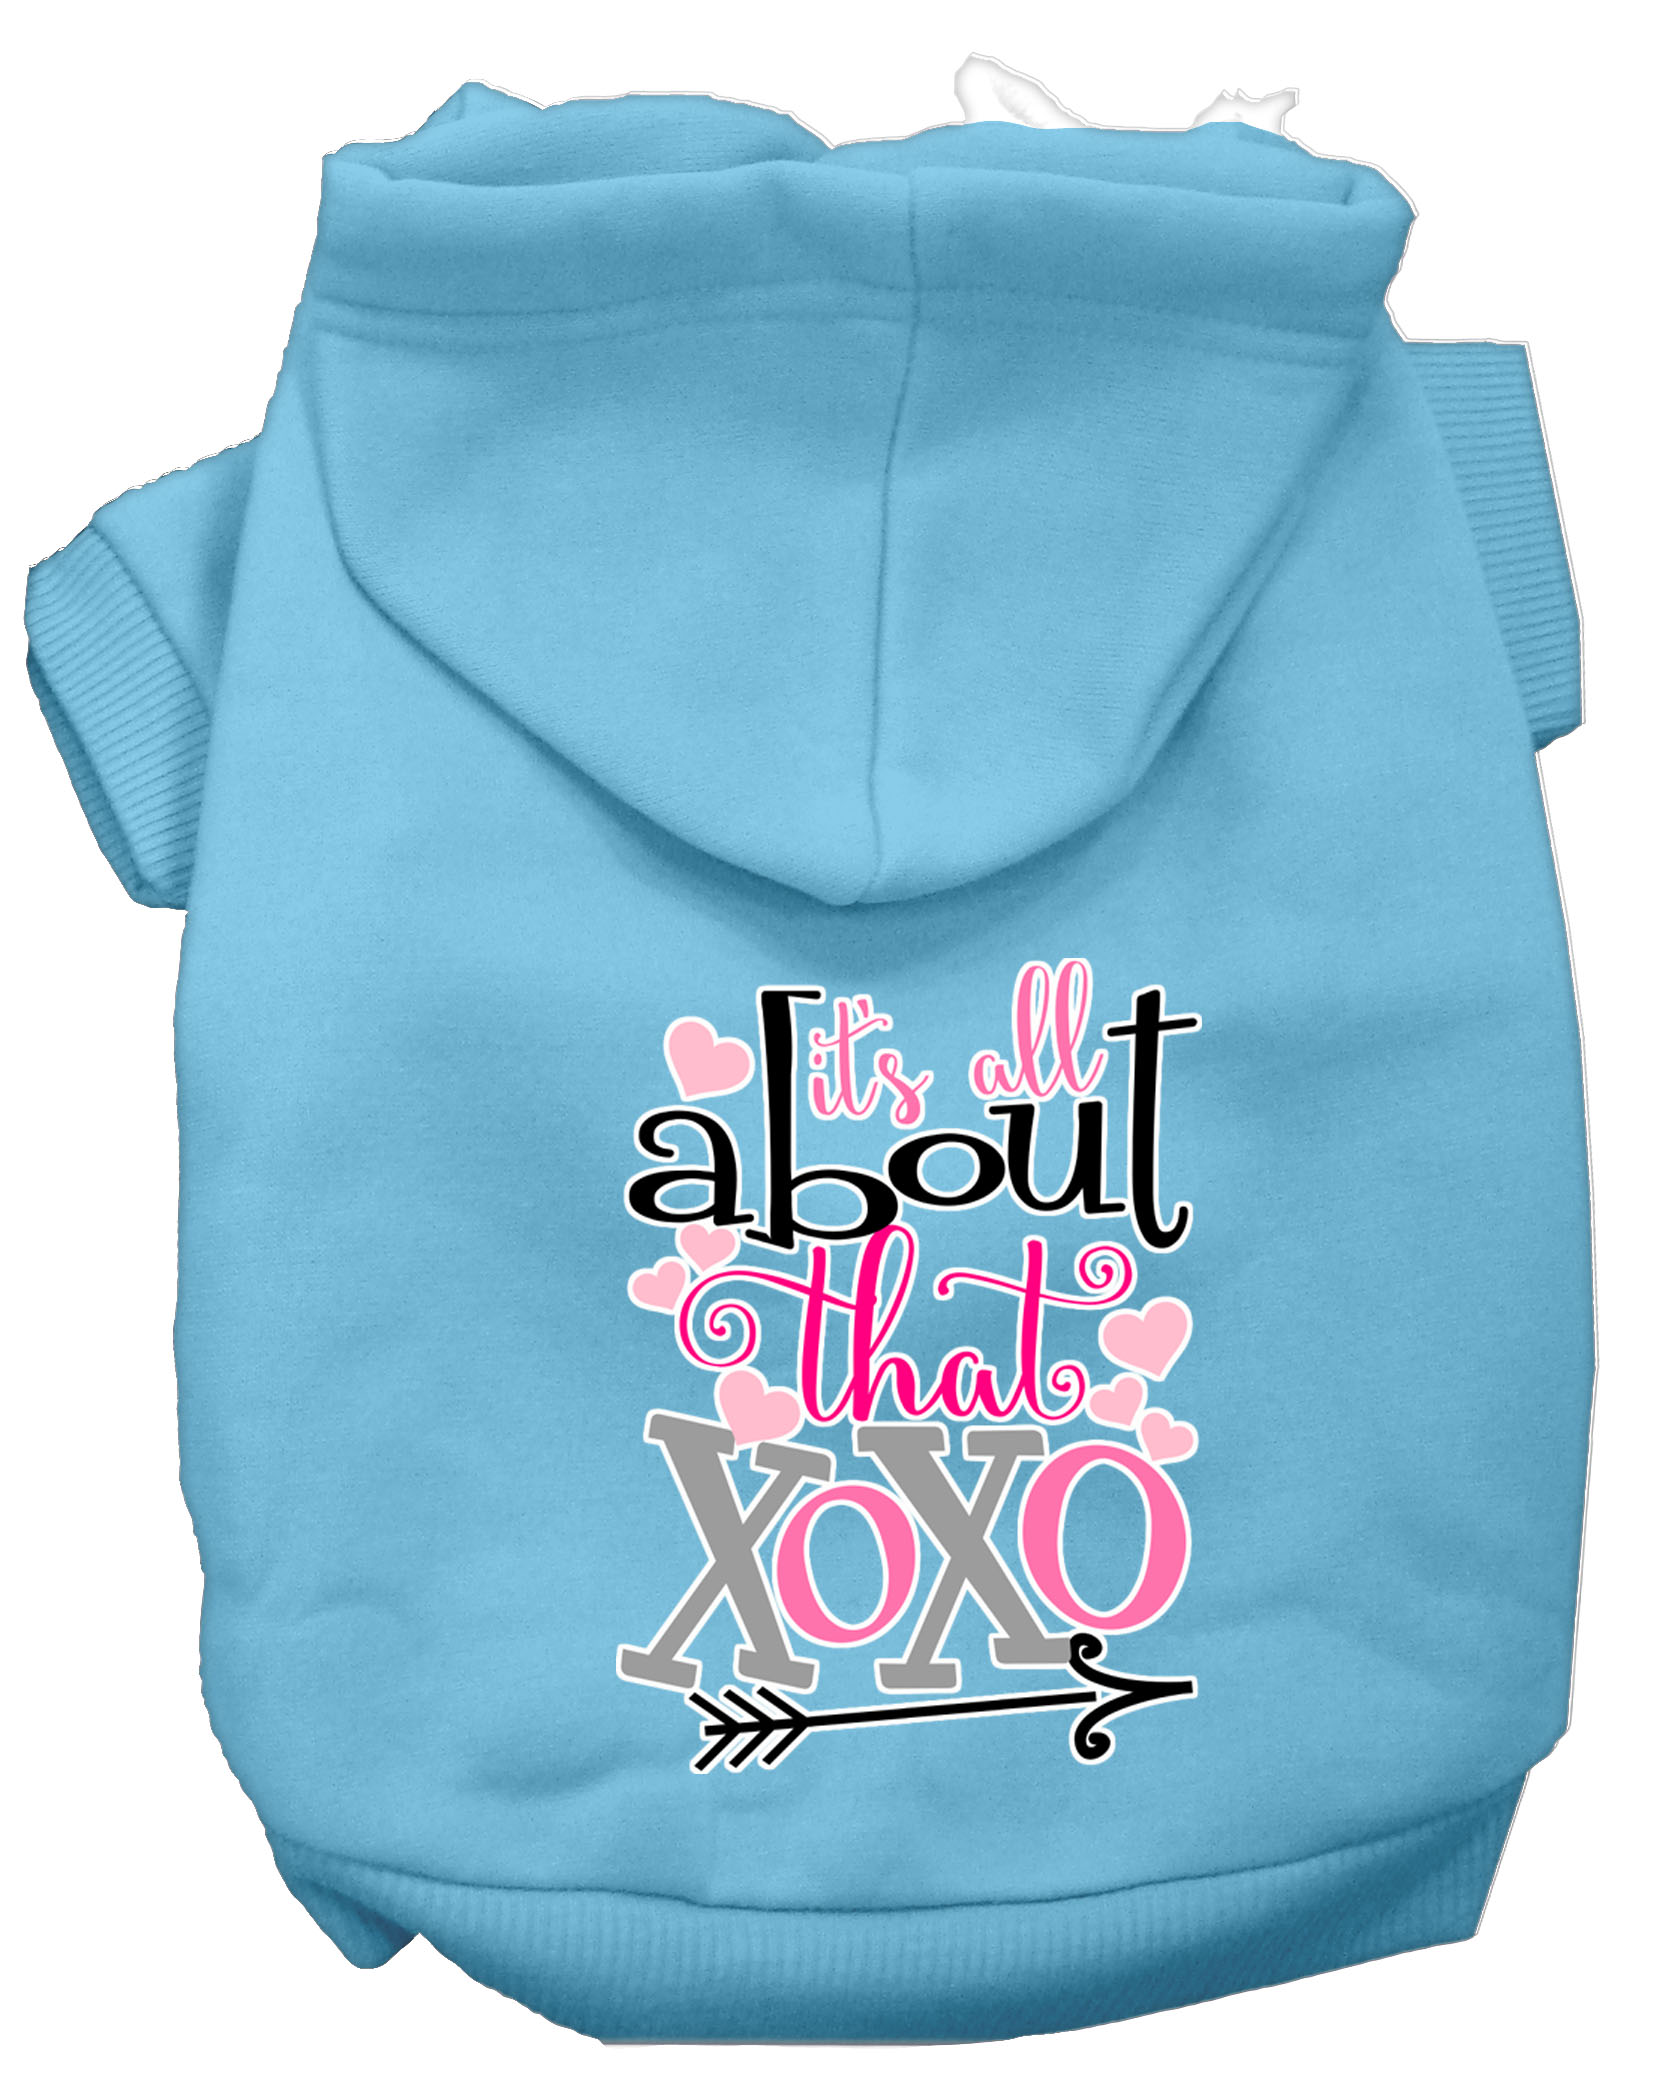 All About that XOXO Screen Print Dog Hoodie Baby Blue XL